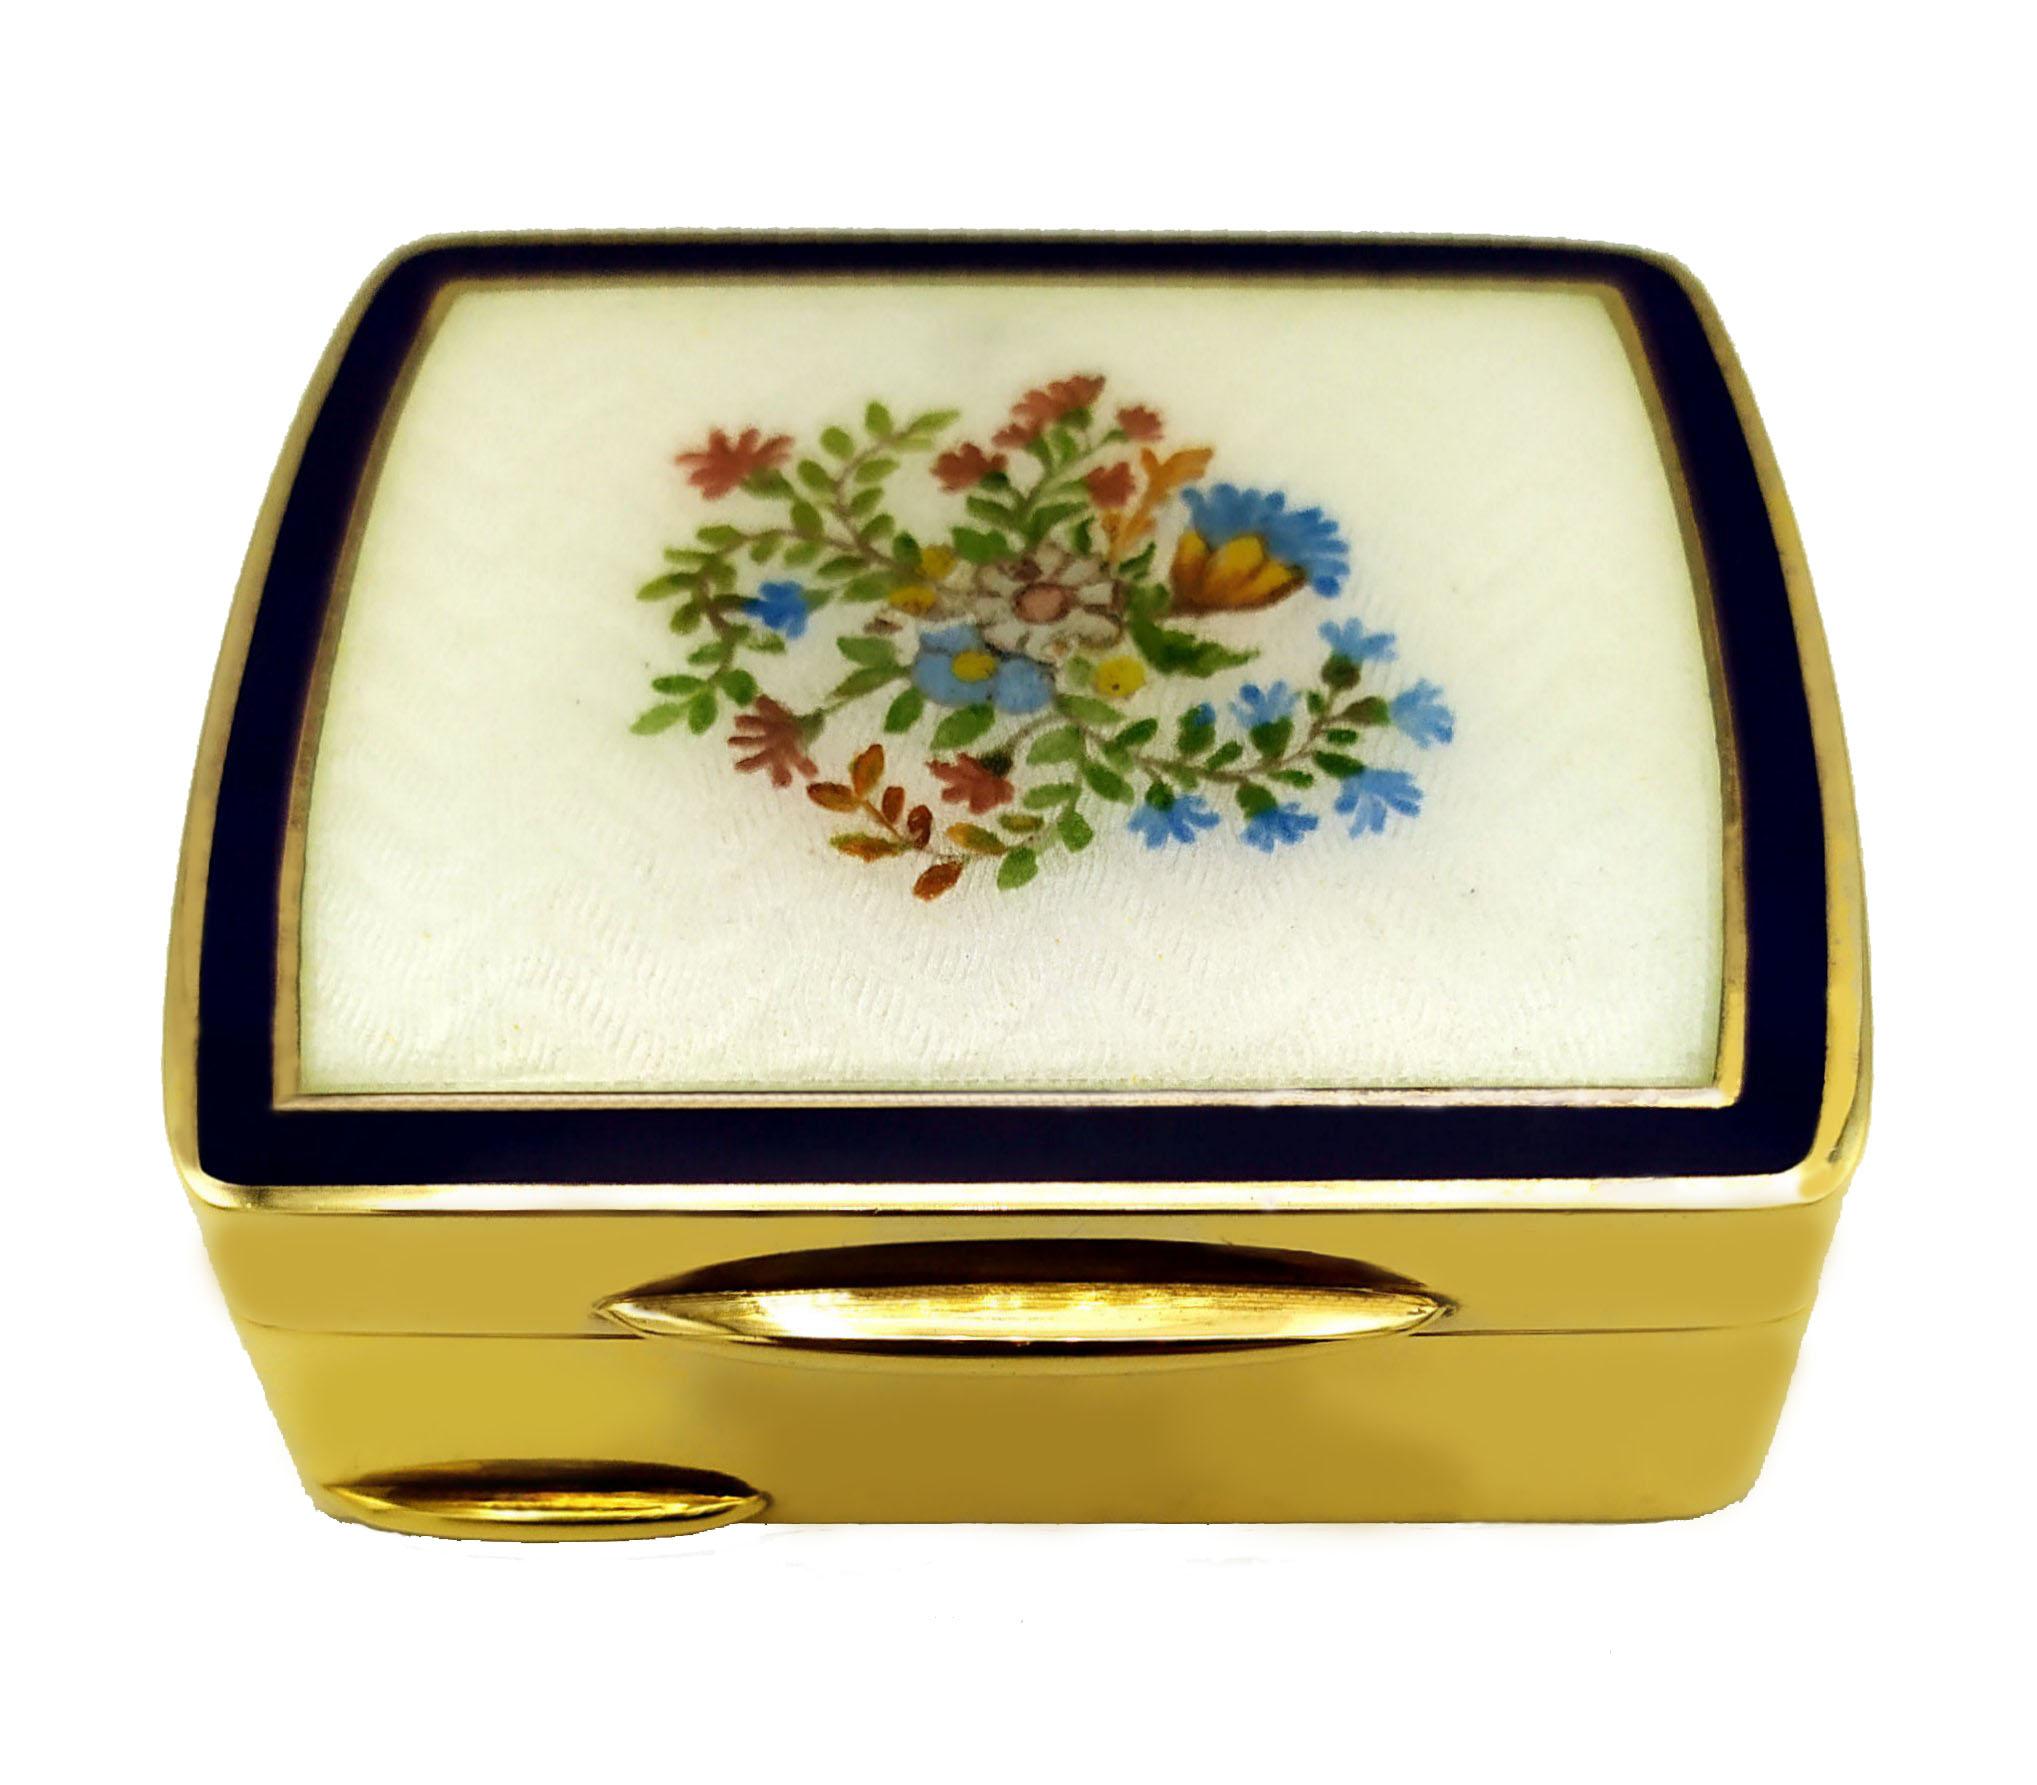  Rectangular table snuff box with 2 slightly rounded sides in 925/1000 sterling silver gold plated with translucent fired enamels on guillochè and hand-painted floral miniature; outer blue line. With lost hinge, i.e. semi-invisible. Art Nouveau